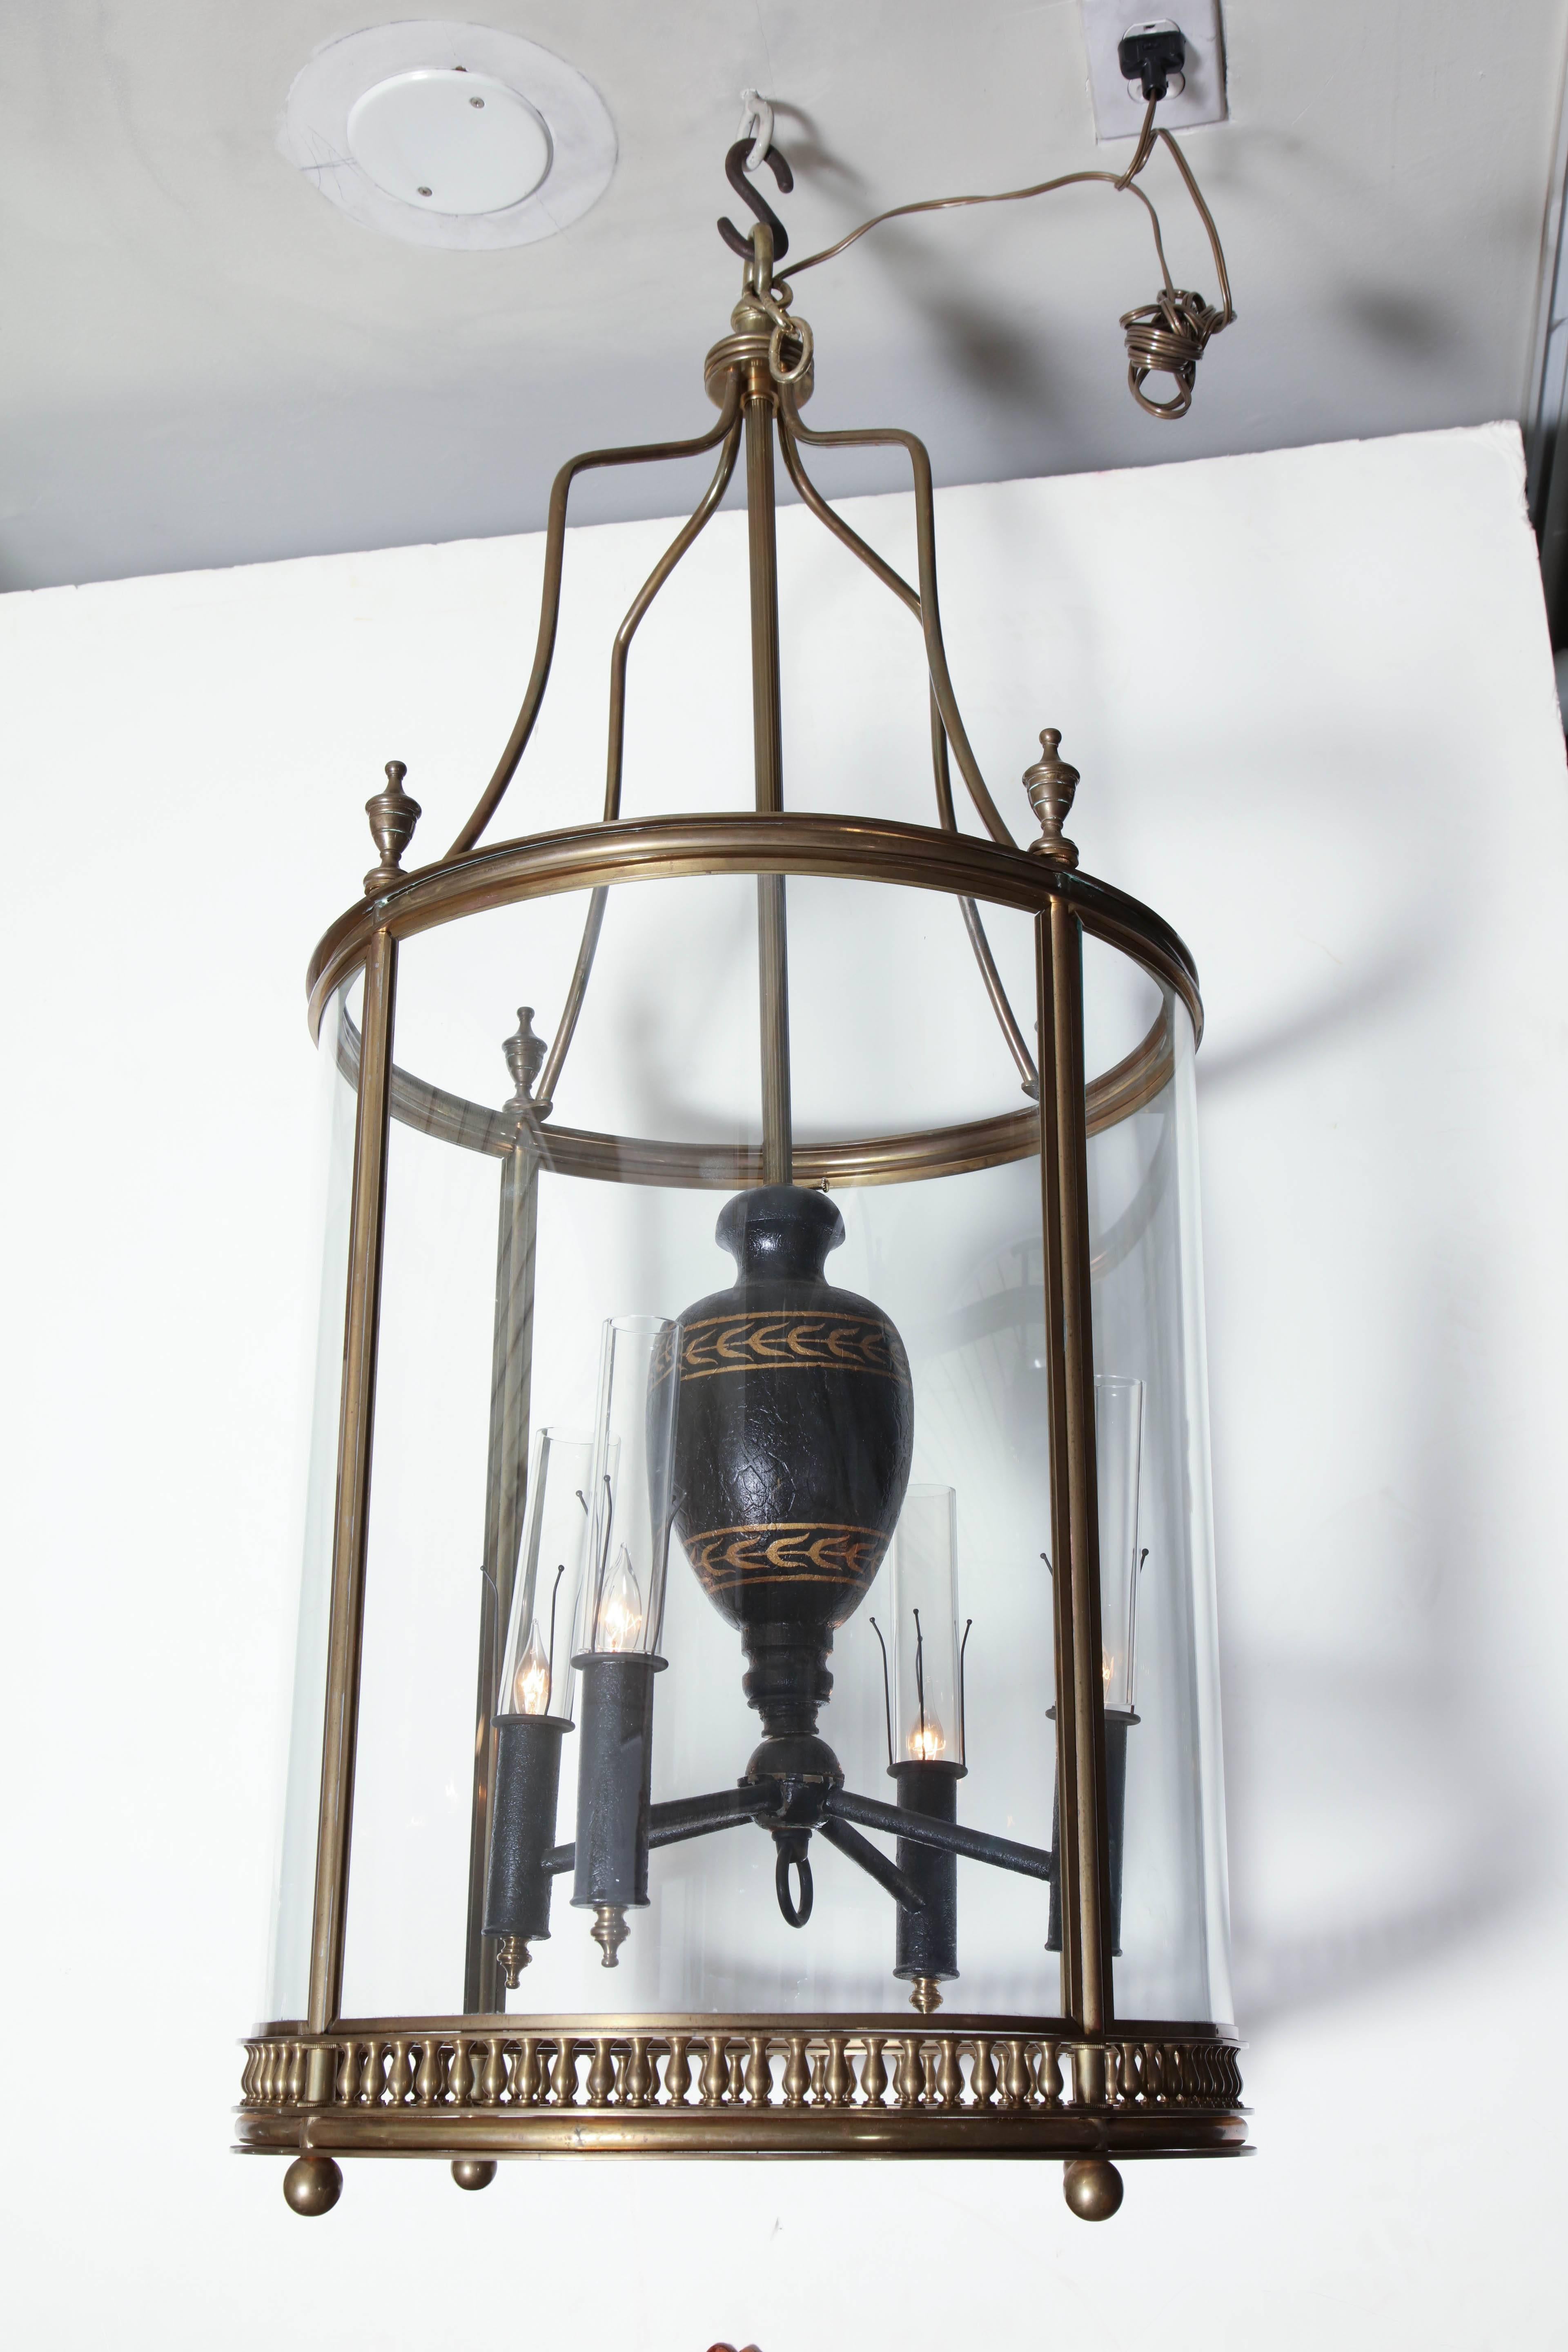 Pair of English brass four-light hall lanterns of cylindrical form with urn form finials.